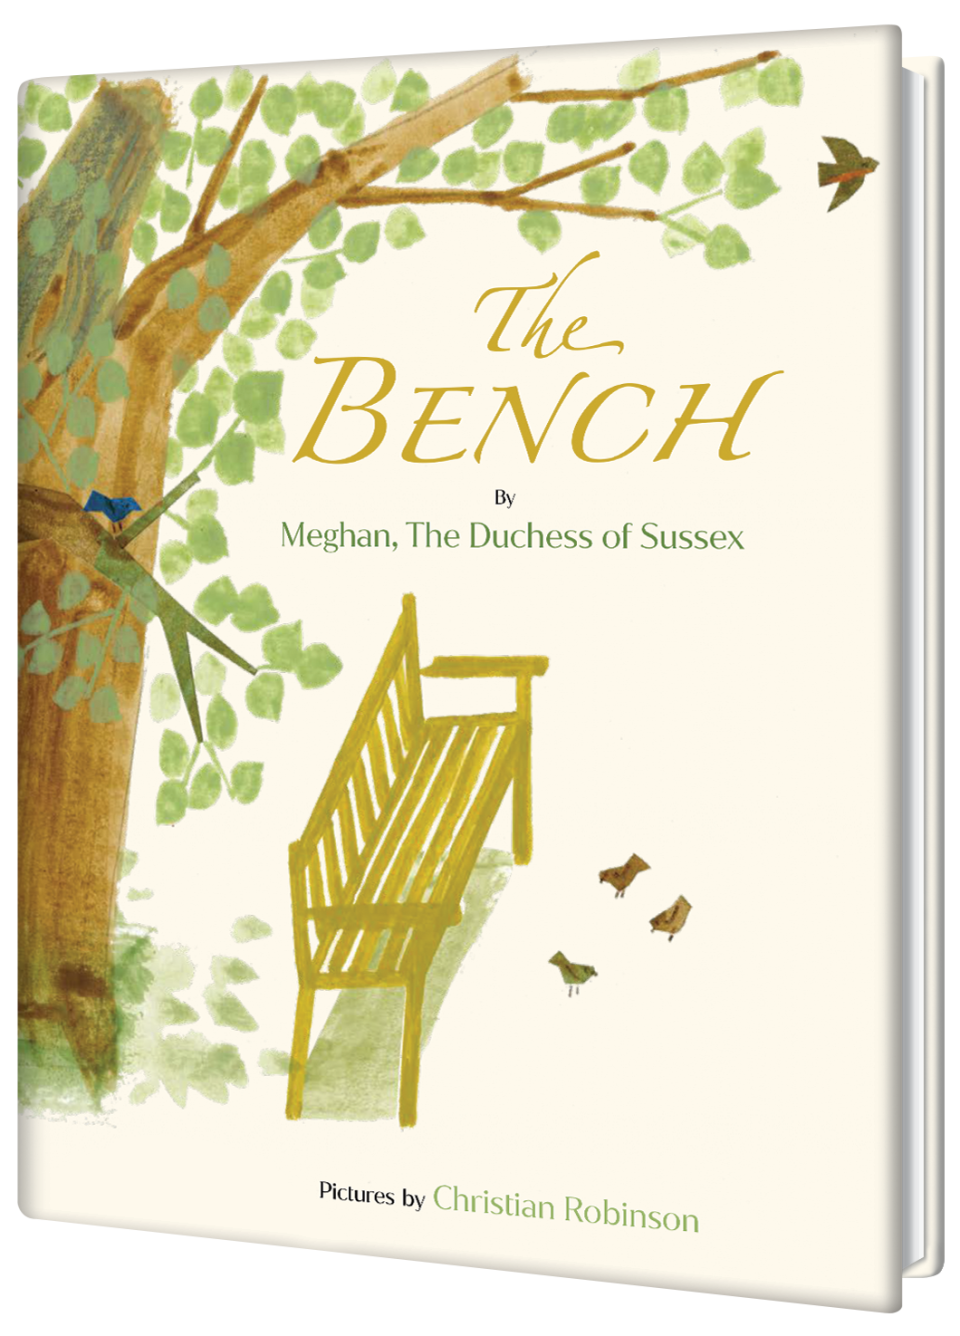 Duchess Meghan's debut children's book "The Bench" looks at the bond between father and son through a mother's eyes.